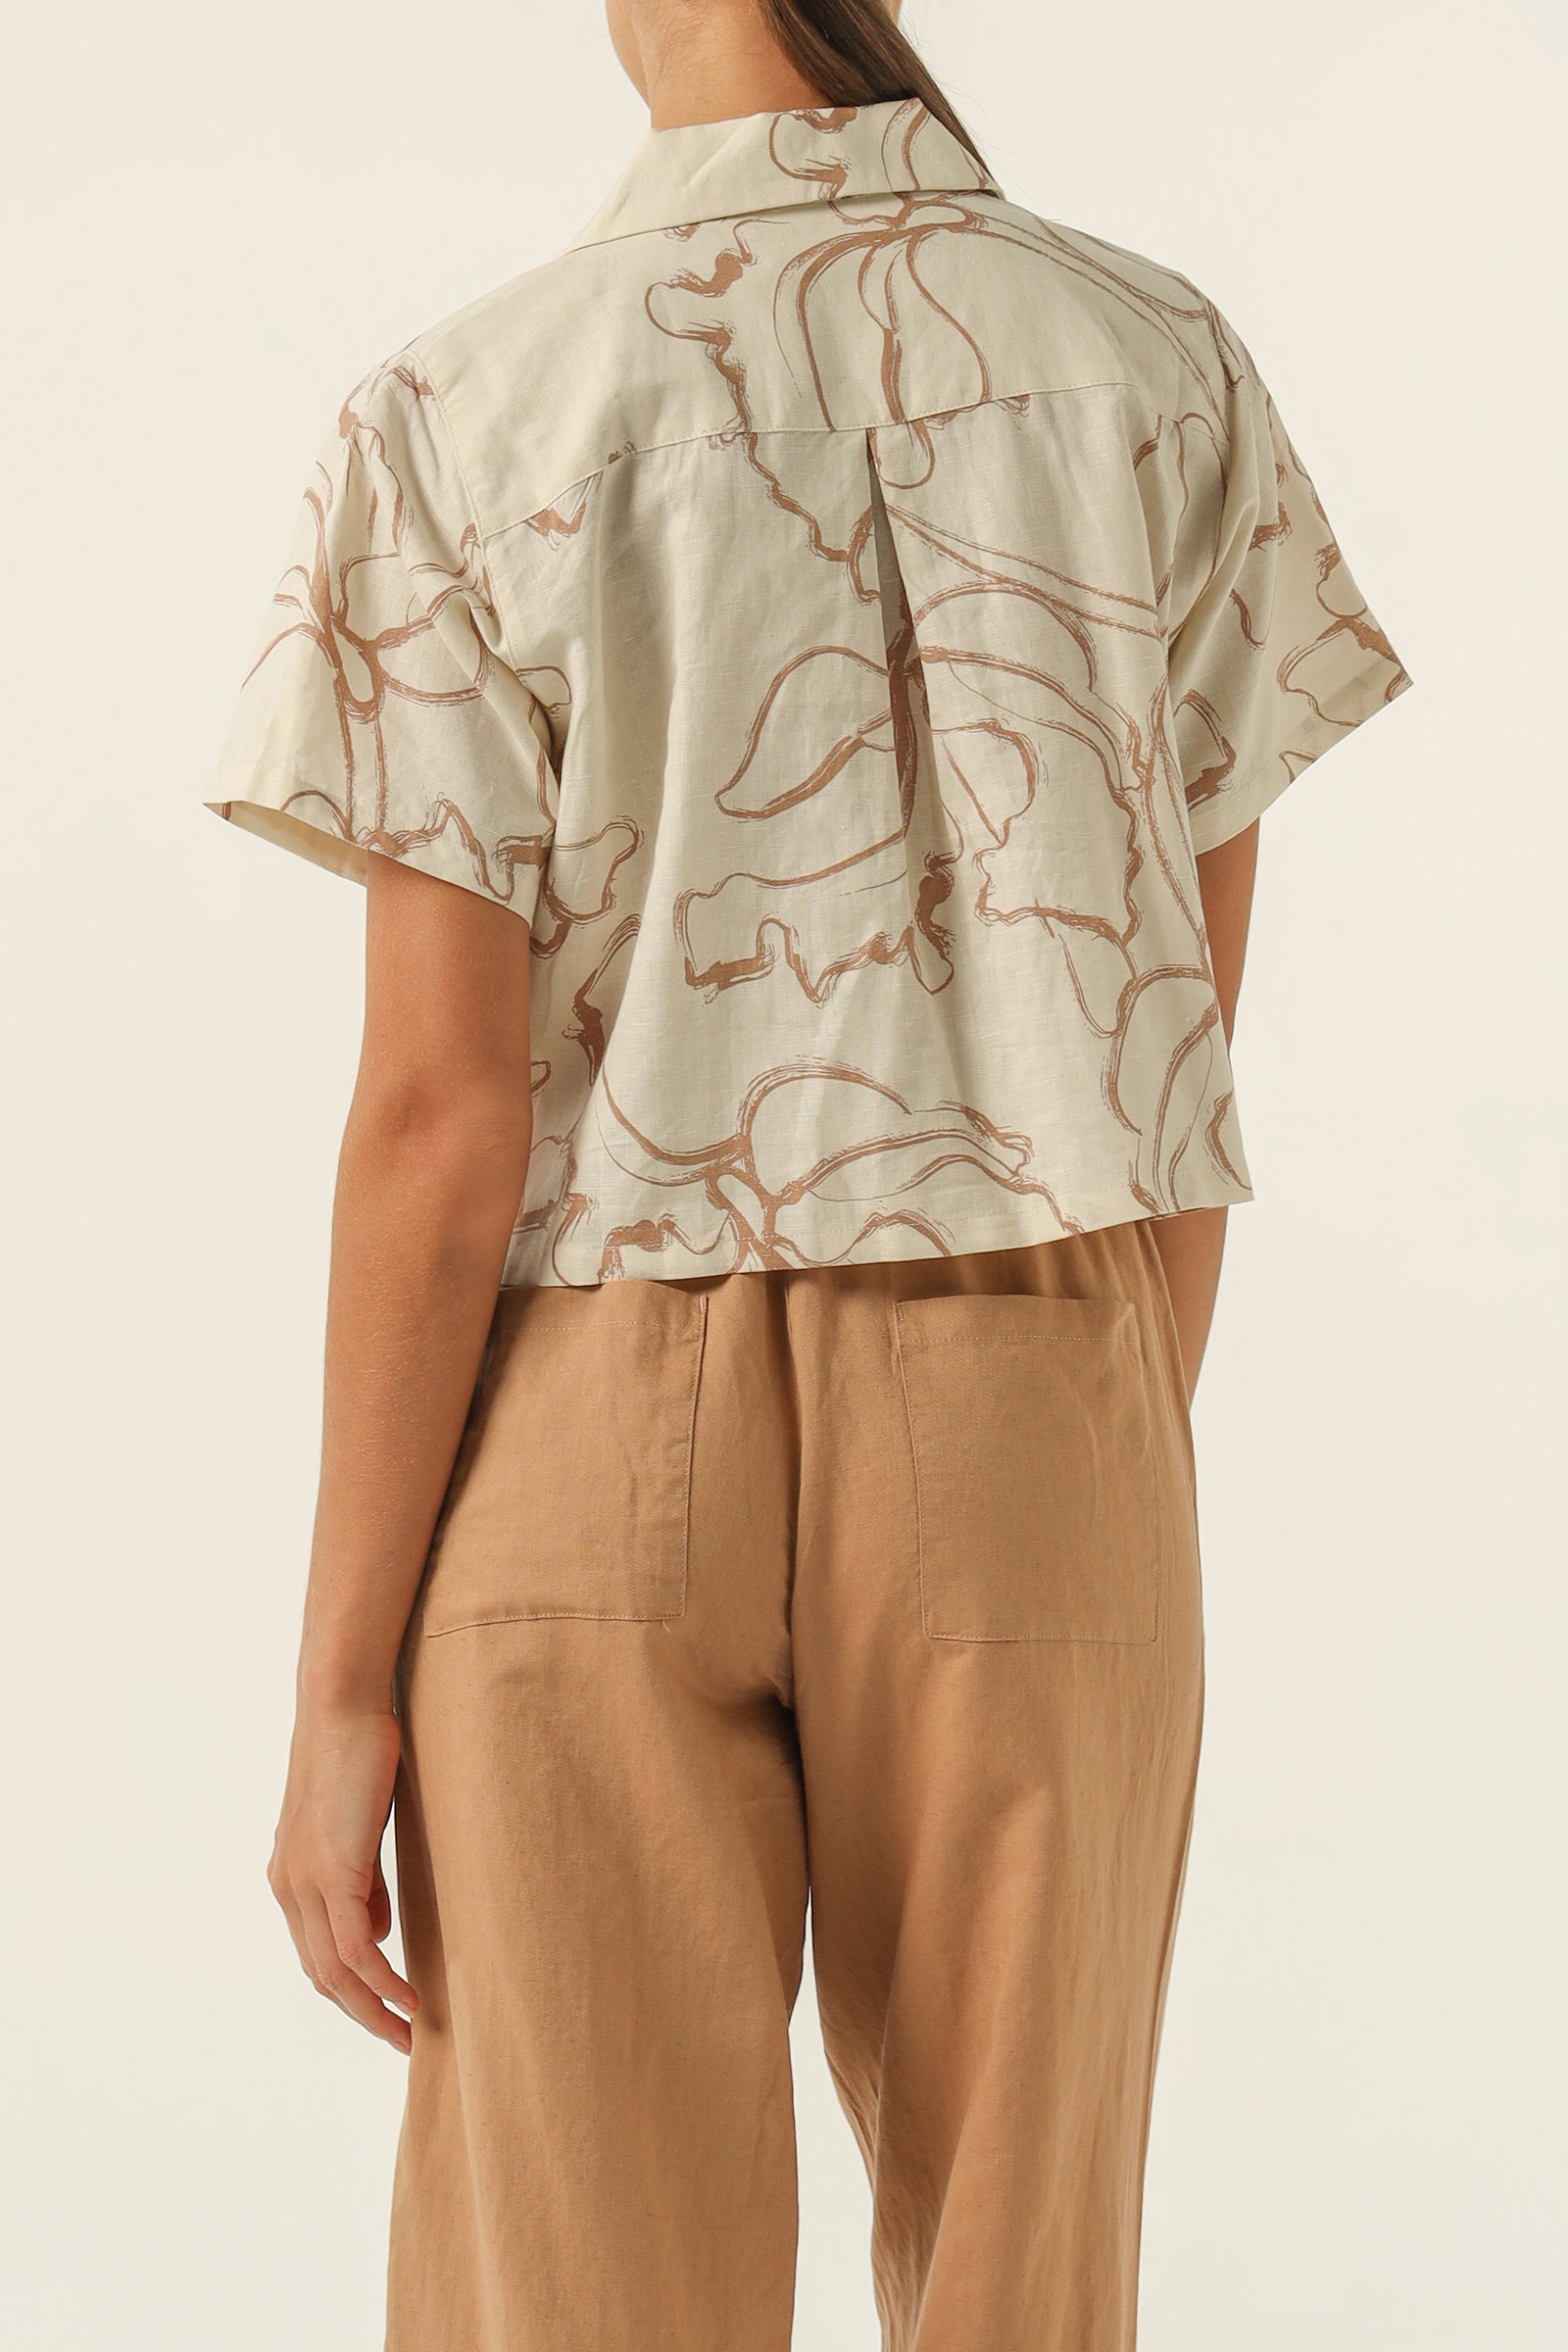 Nude Lucy Zion Shirt Matisse  